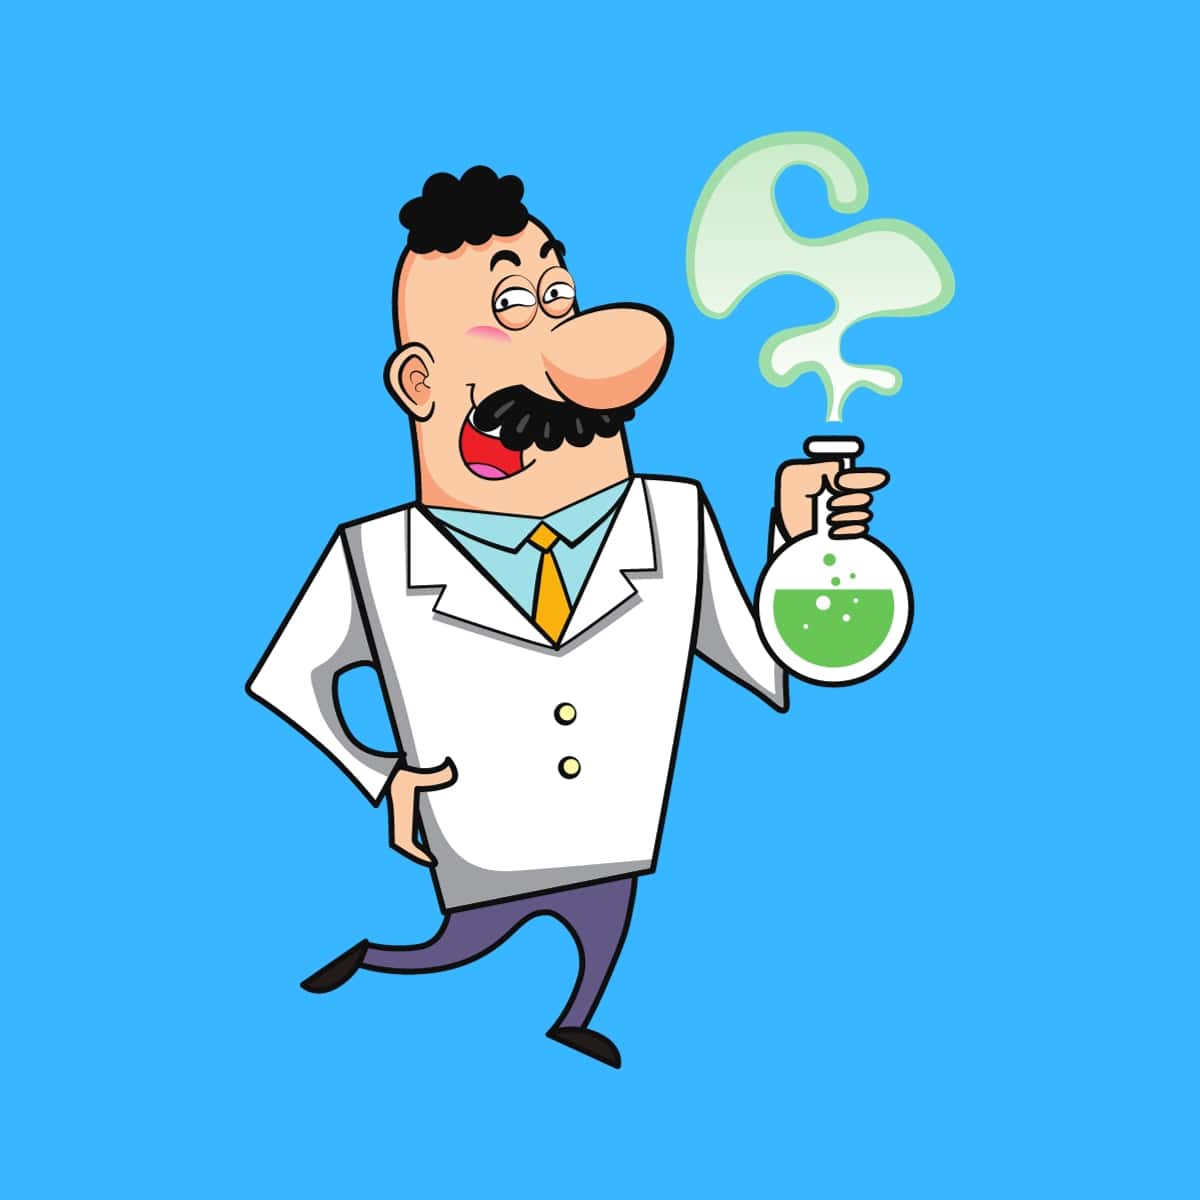 Cartoon graphic of chemist holding chemicals on blue background.